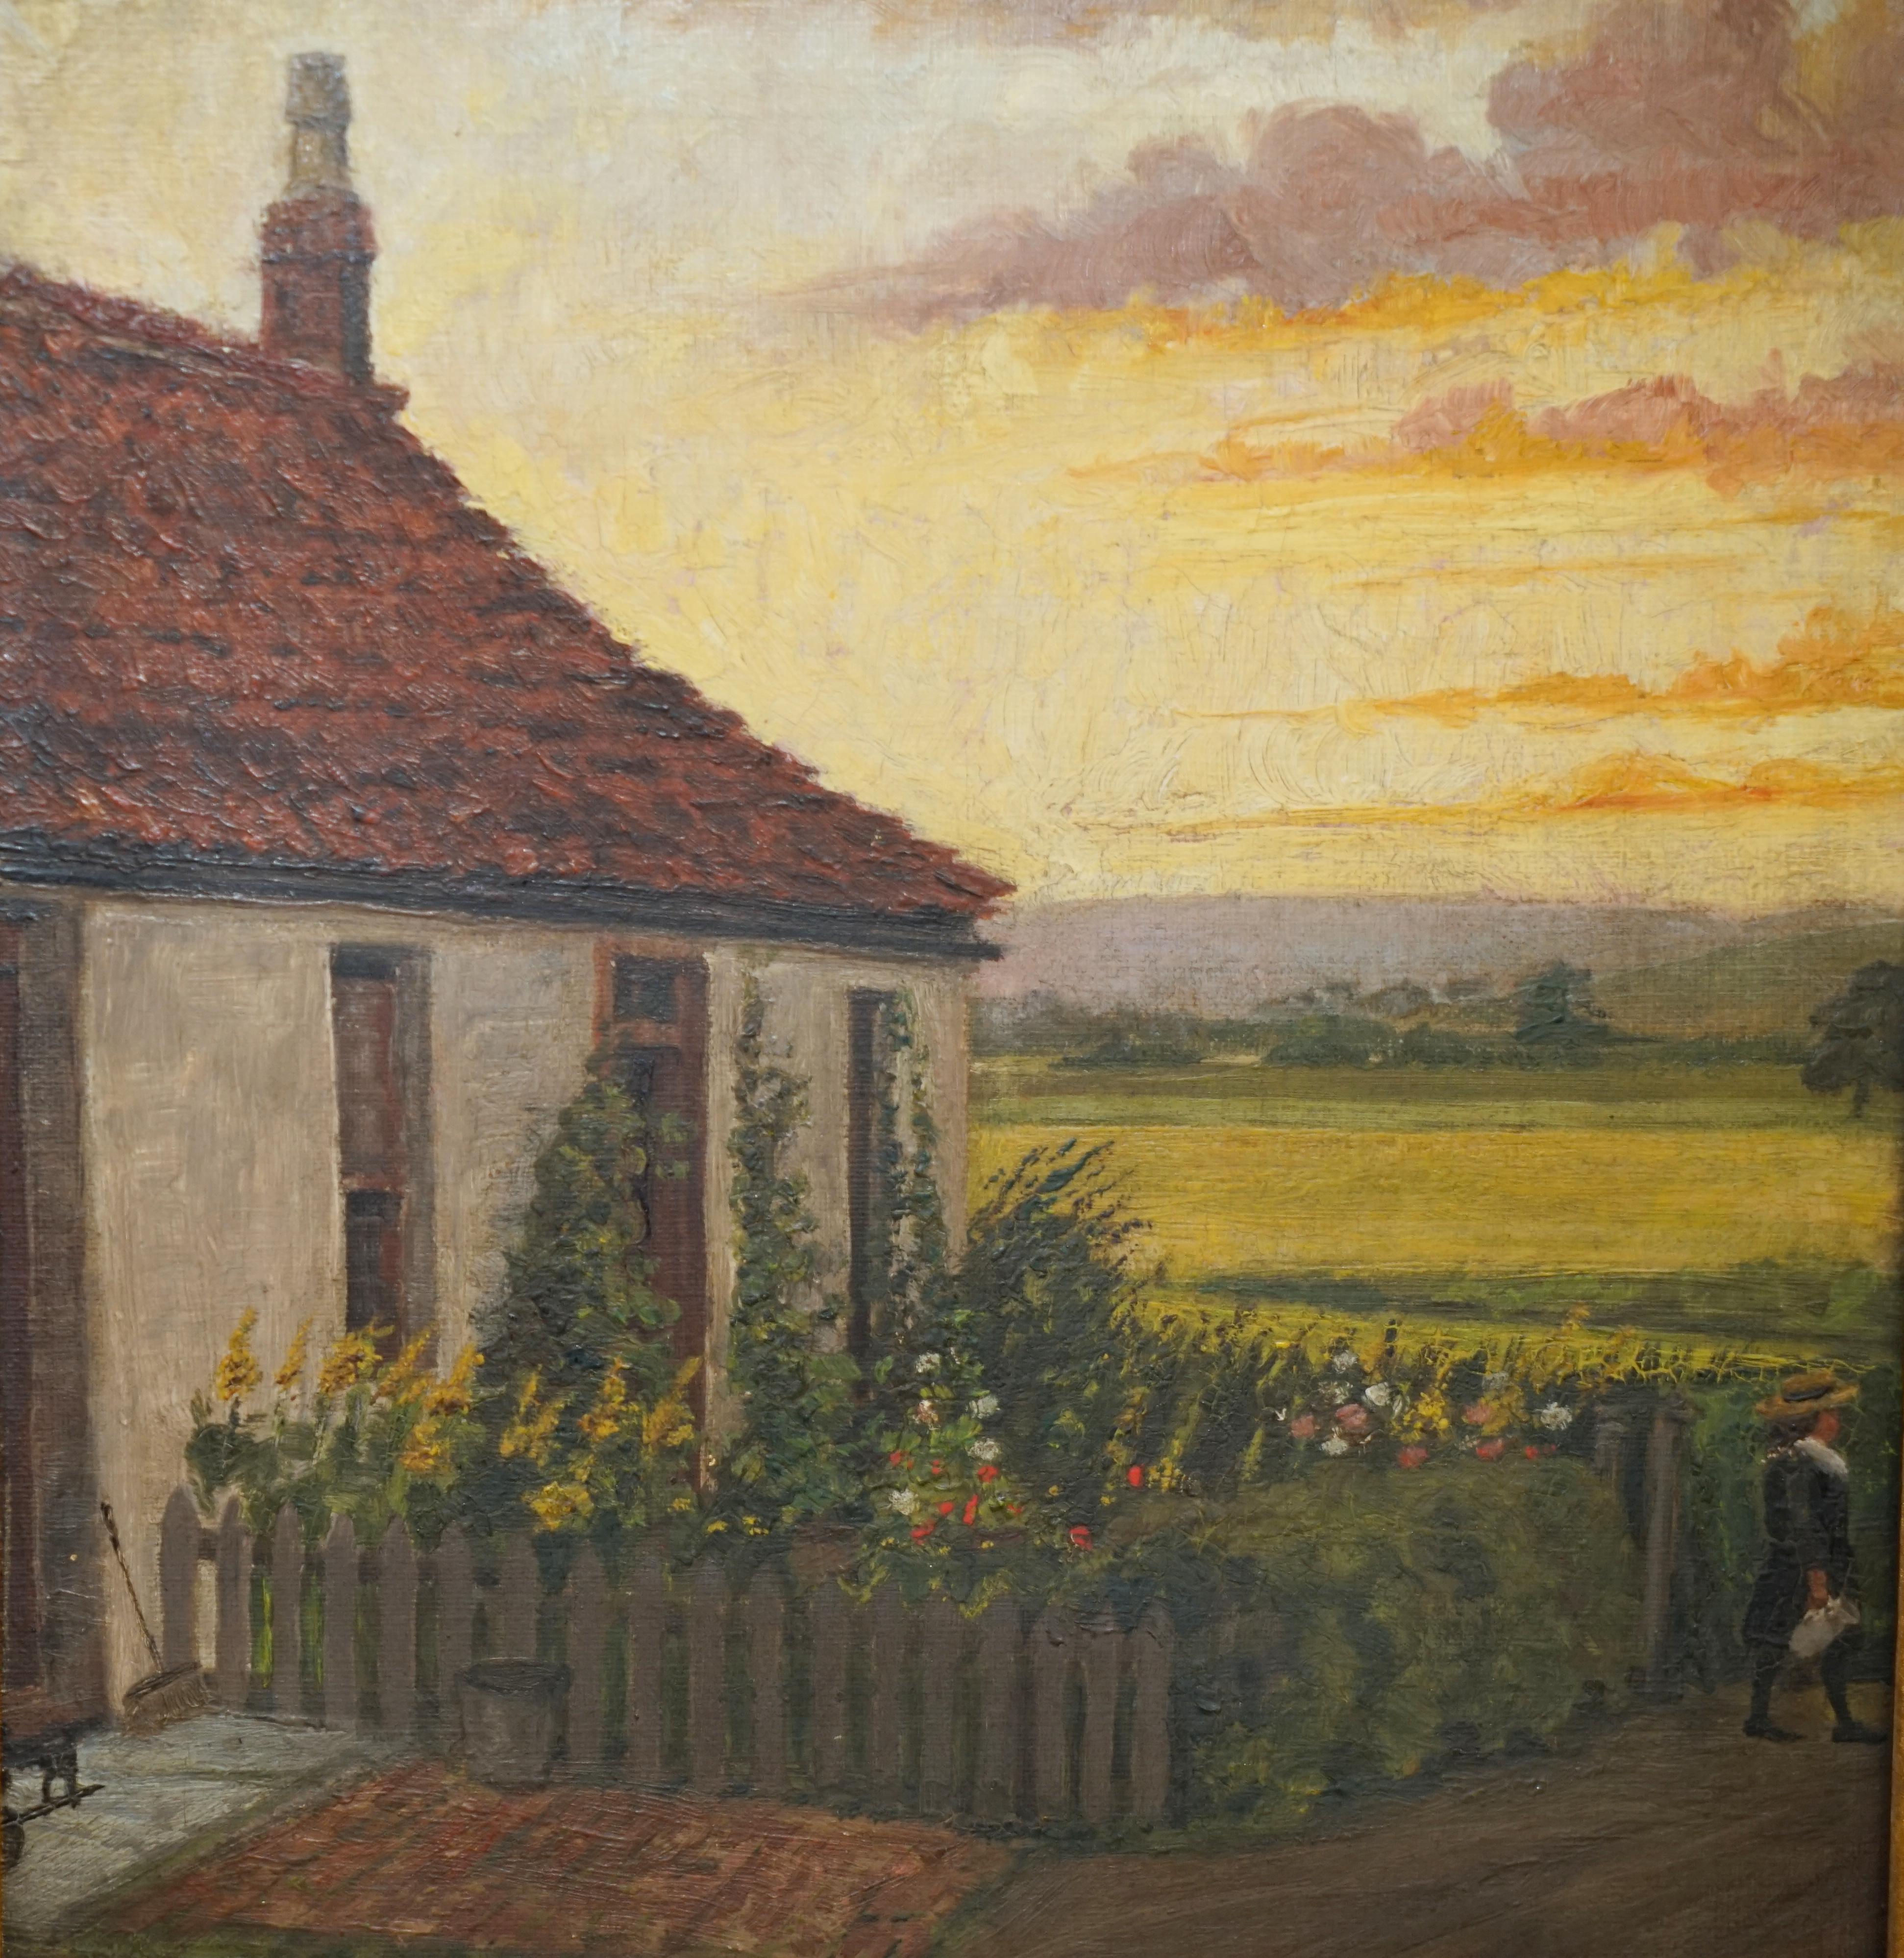 EXQUISITE 1894 SiGNED & DATED OIL ON CANVAS IN ORIGINAL FRAME OF FARM COTTAGE 3